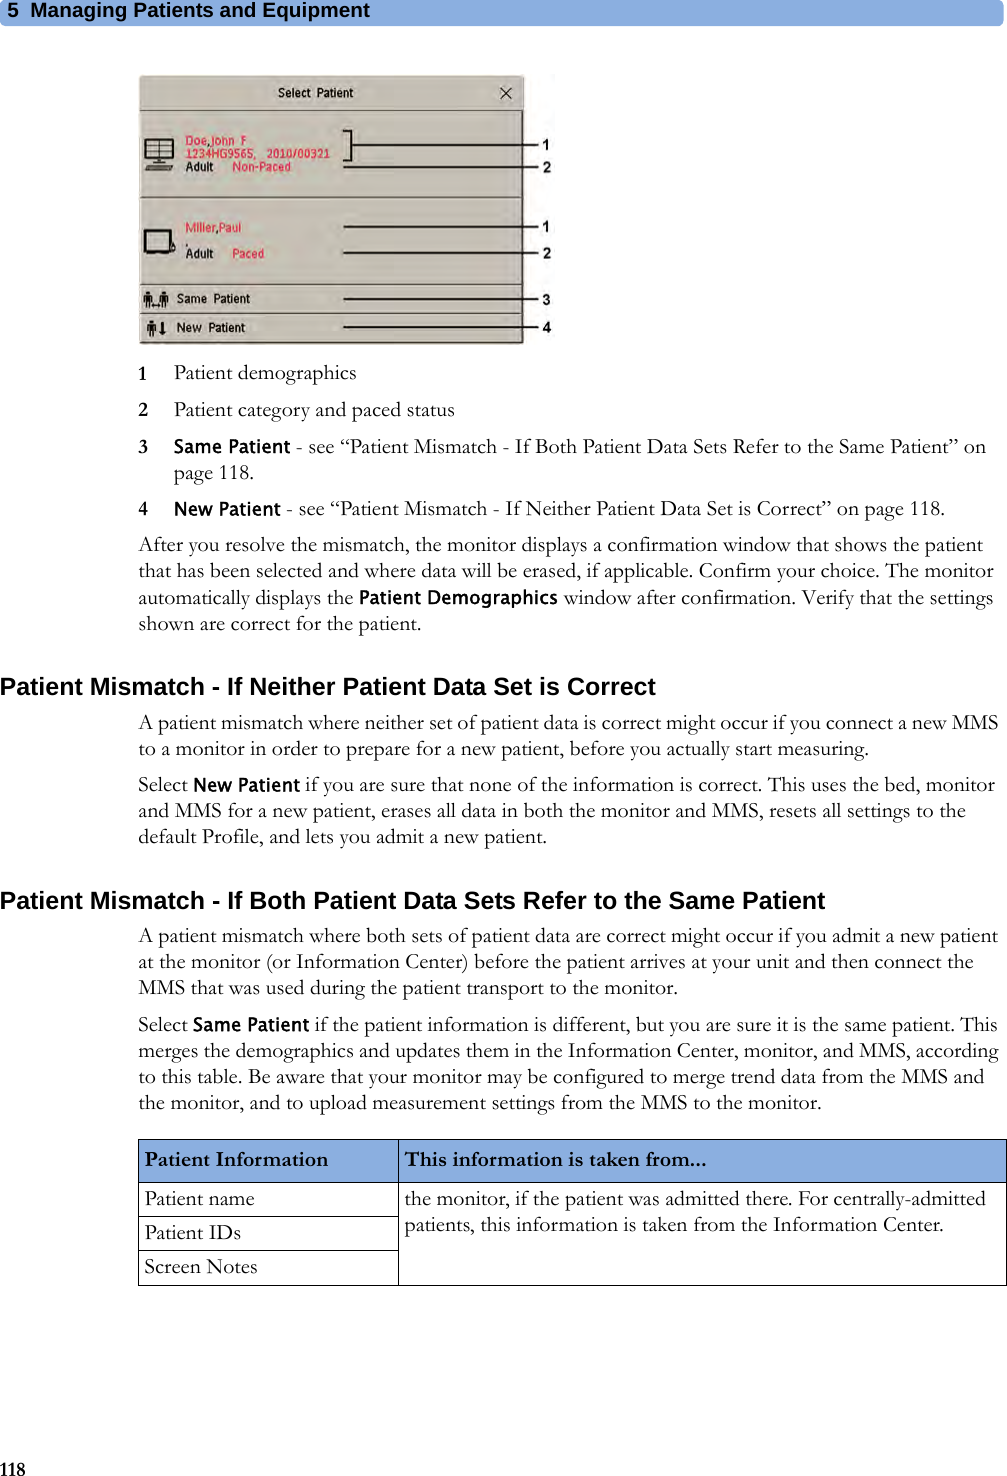 5 Managing Patients and Equipment1181Patient demographics2Patient category and paced status3Same Patient - see “Patient Mismatch - If Both Patient Data Sets Refer to the Same Patient” on page 118.4New Patient - see “Patient Mismatch - If Neither Patient Data Set is Correct” on page 118.After you resolve the mismatch, the monitor displays a confirmation window that shows the patient that has been selected and where data will be erased, if applicable. Confirm your choice. The monitor automatically displays the Patient Demographics window after confirmation. Verify that the settings shown are correct for the patient.Patient Mismatch - If Neither Patient Data Set is CorrectA patient mismatch where neither set of patient data is correct might occur if you connect a new MMS to a monitor in order to prepare for a new patient, before you actually start measuring.Select New Patient if you are sure that none of the information is correct. This uses the bed, monitor and MMS for a new patient, erases all data in both the monitor and MMS, resets all settings to the default Profile, and lets you admit a new patient.Patient Mismatch - If Both Patient Data Sets Refer to the Same PatientA patient mismatch where both sets of patient data are correct might occur if you admit a new patient at the monitor (or Information Center) before the patient arrives at your unit and then connect the MMS that was used during the patient transport to the monitor.Select Same Patient if the patient information is different, but you are sure it is the same patient. This merges the demographics and updates them in the Information Center, monitor, and MMS, according to this table. Be aware that your monitor may be configured to merge trend data from the MMS and the monitor, and to upload measurement settings from the MMS to the monitor.Patient Information This information is taken from...Patient name the monitor, if the patient was admitted there. For centrally-admitted patients, this information is taken from the Information Center.Patient IDsScreen Notes